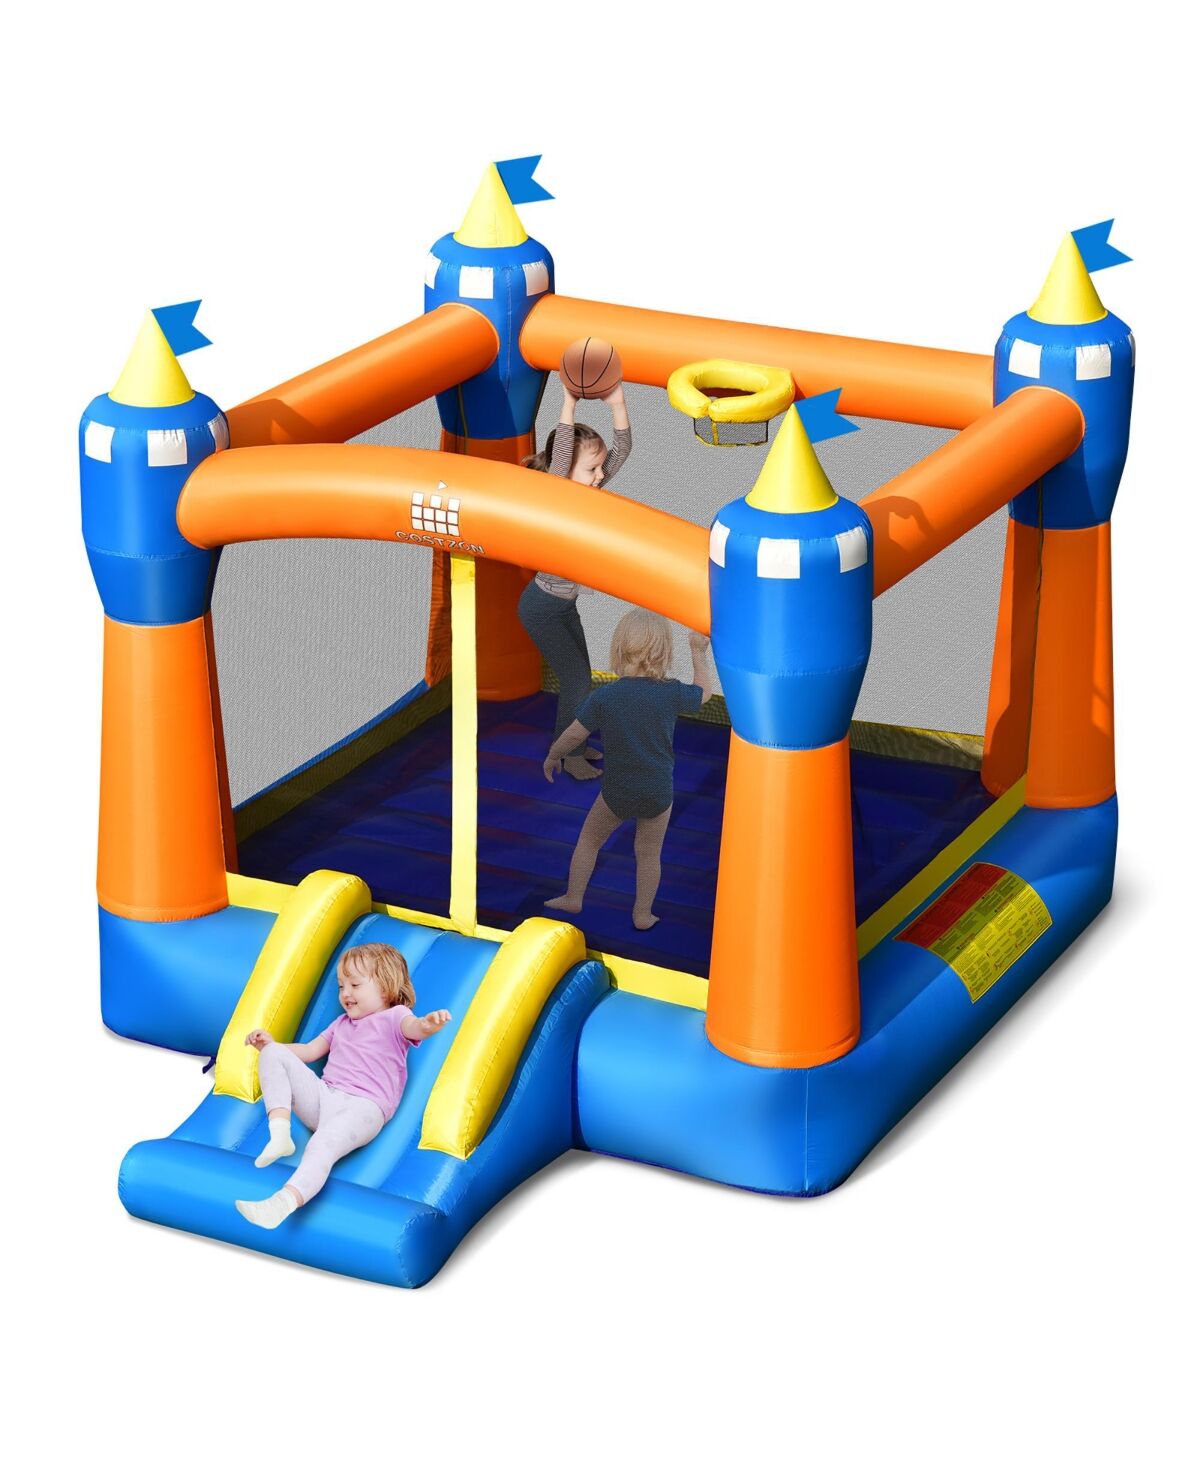 Costway Inflatable Bounce House Kids Magic Castle w/ Large Jumping Area Without Blower - Blue